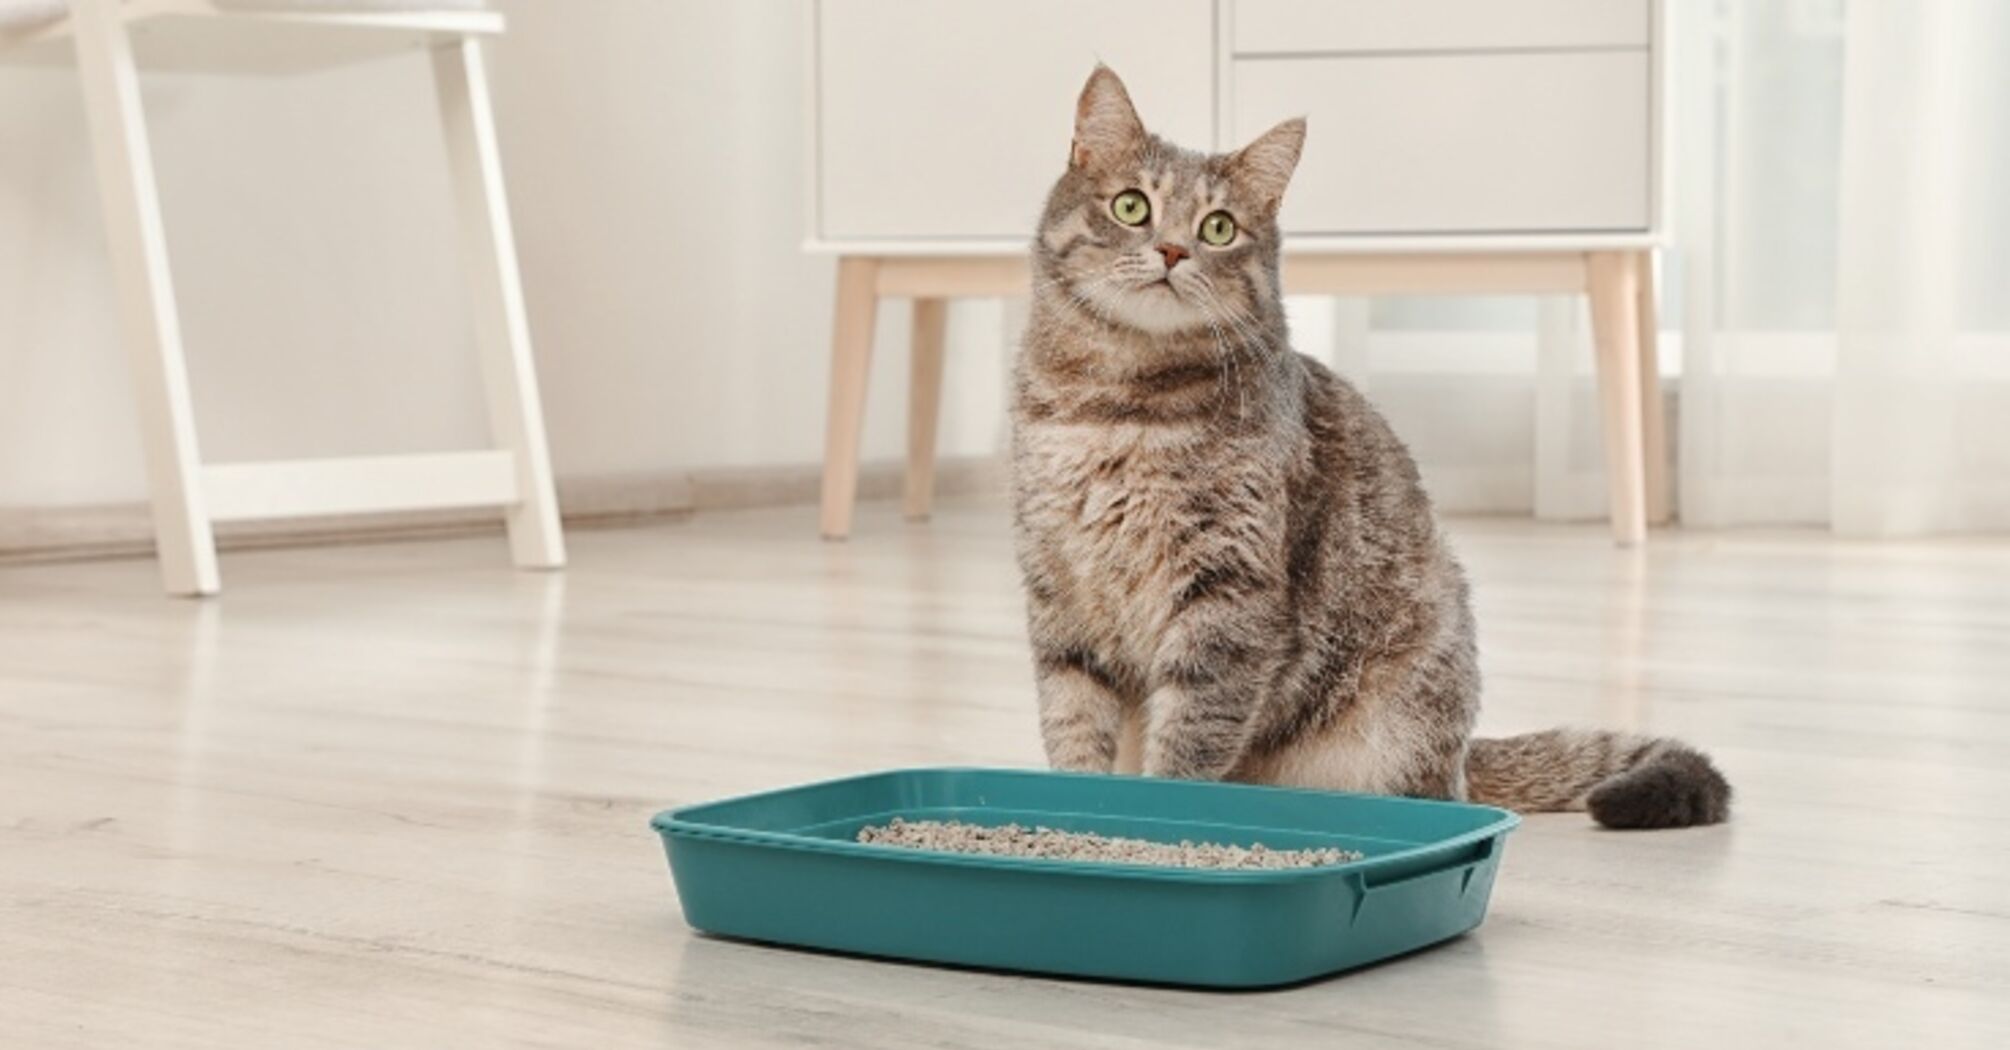 How to train a cat to the litter box